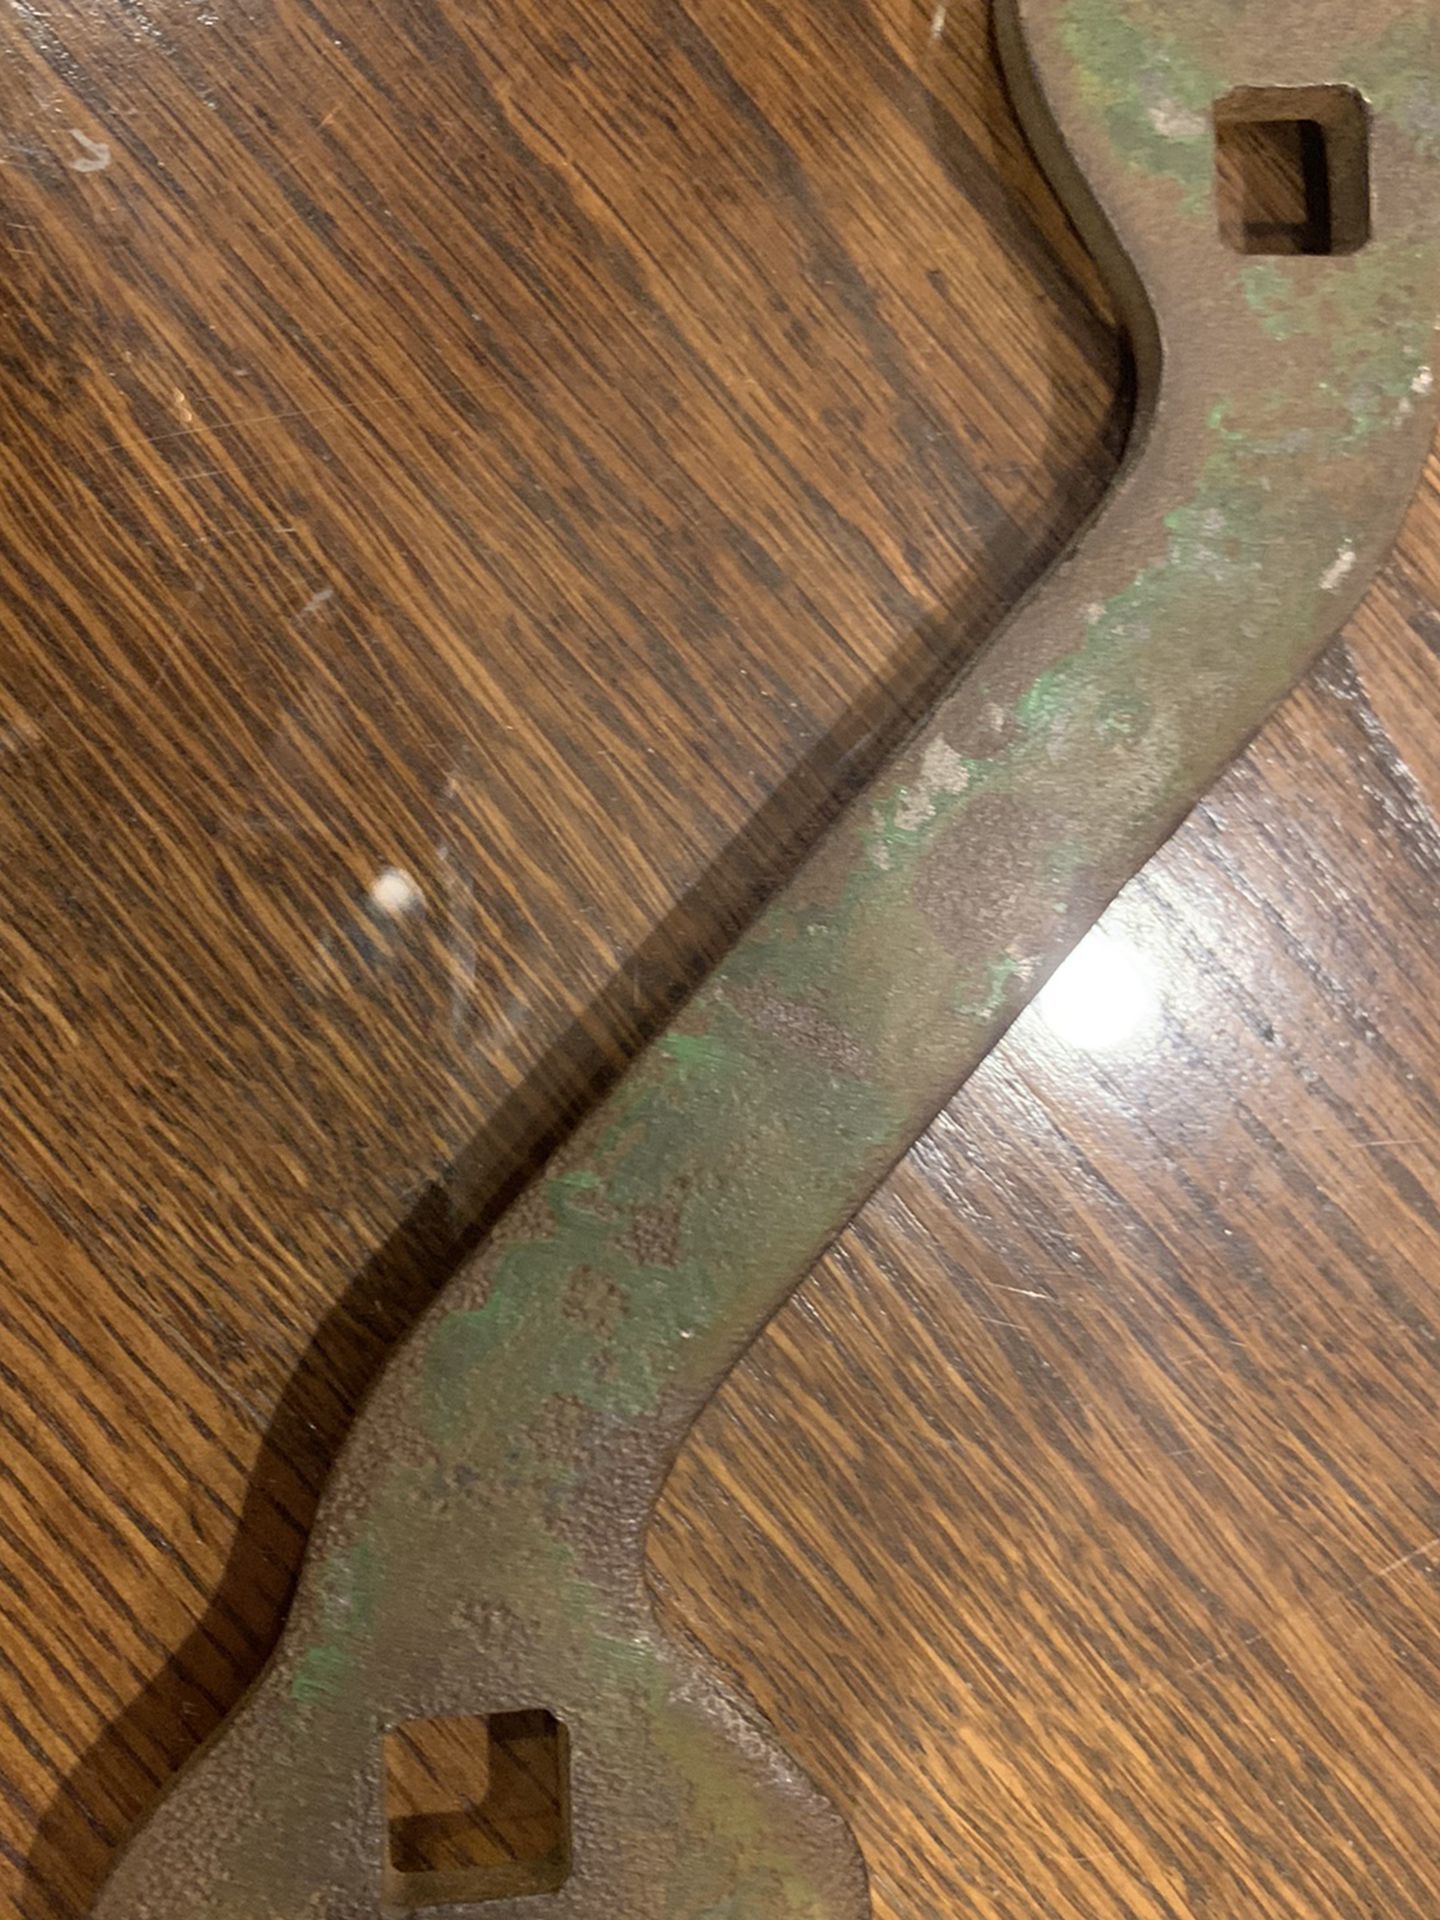 Vintage John Deere JD-51 A Wrench. Tractor planter implement antique tool.